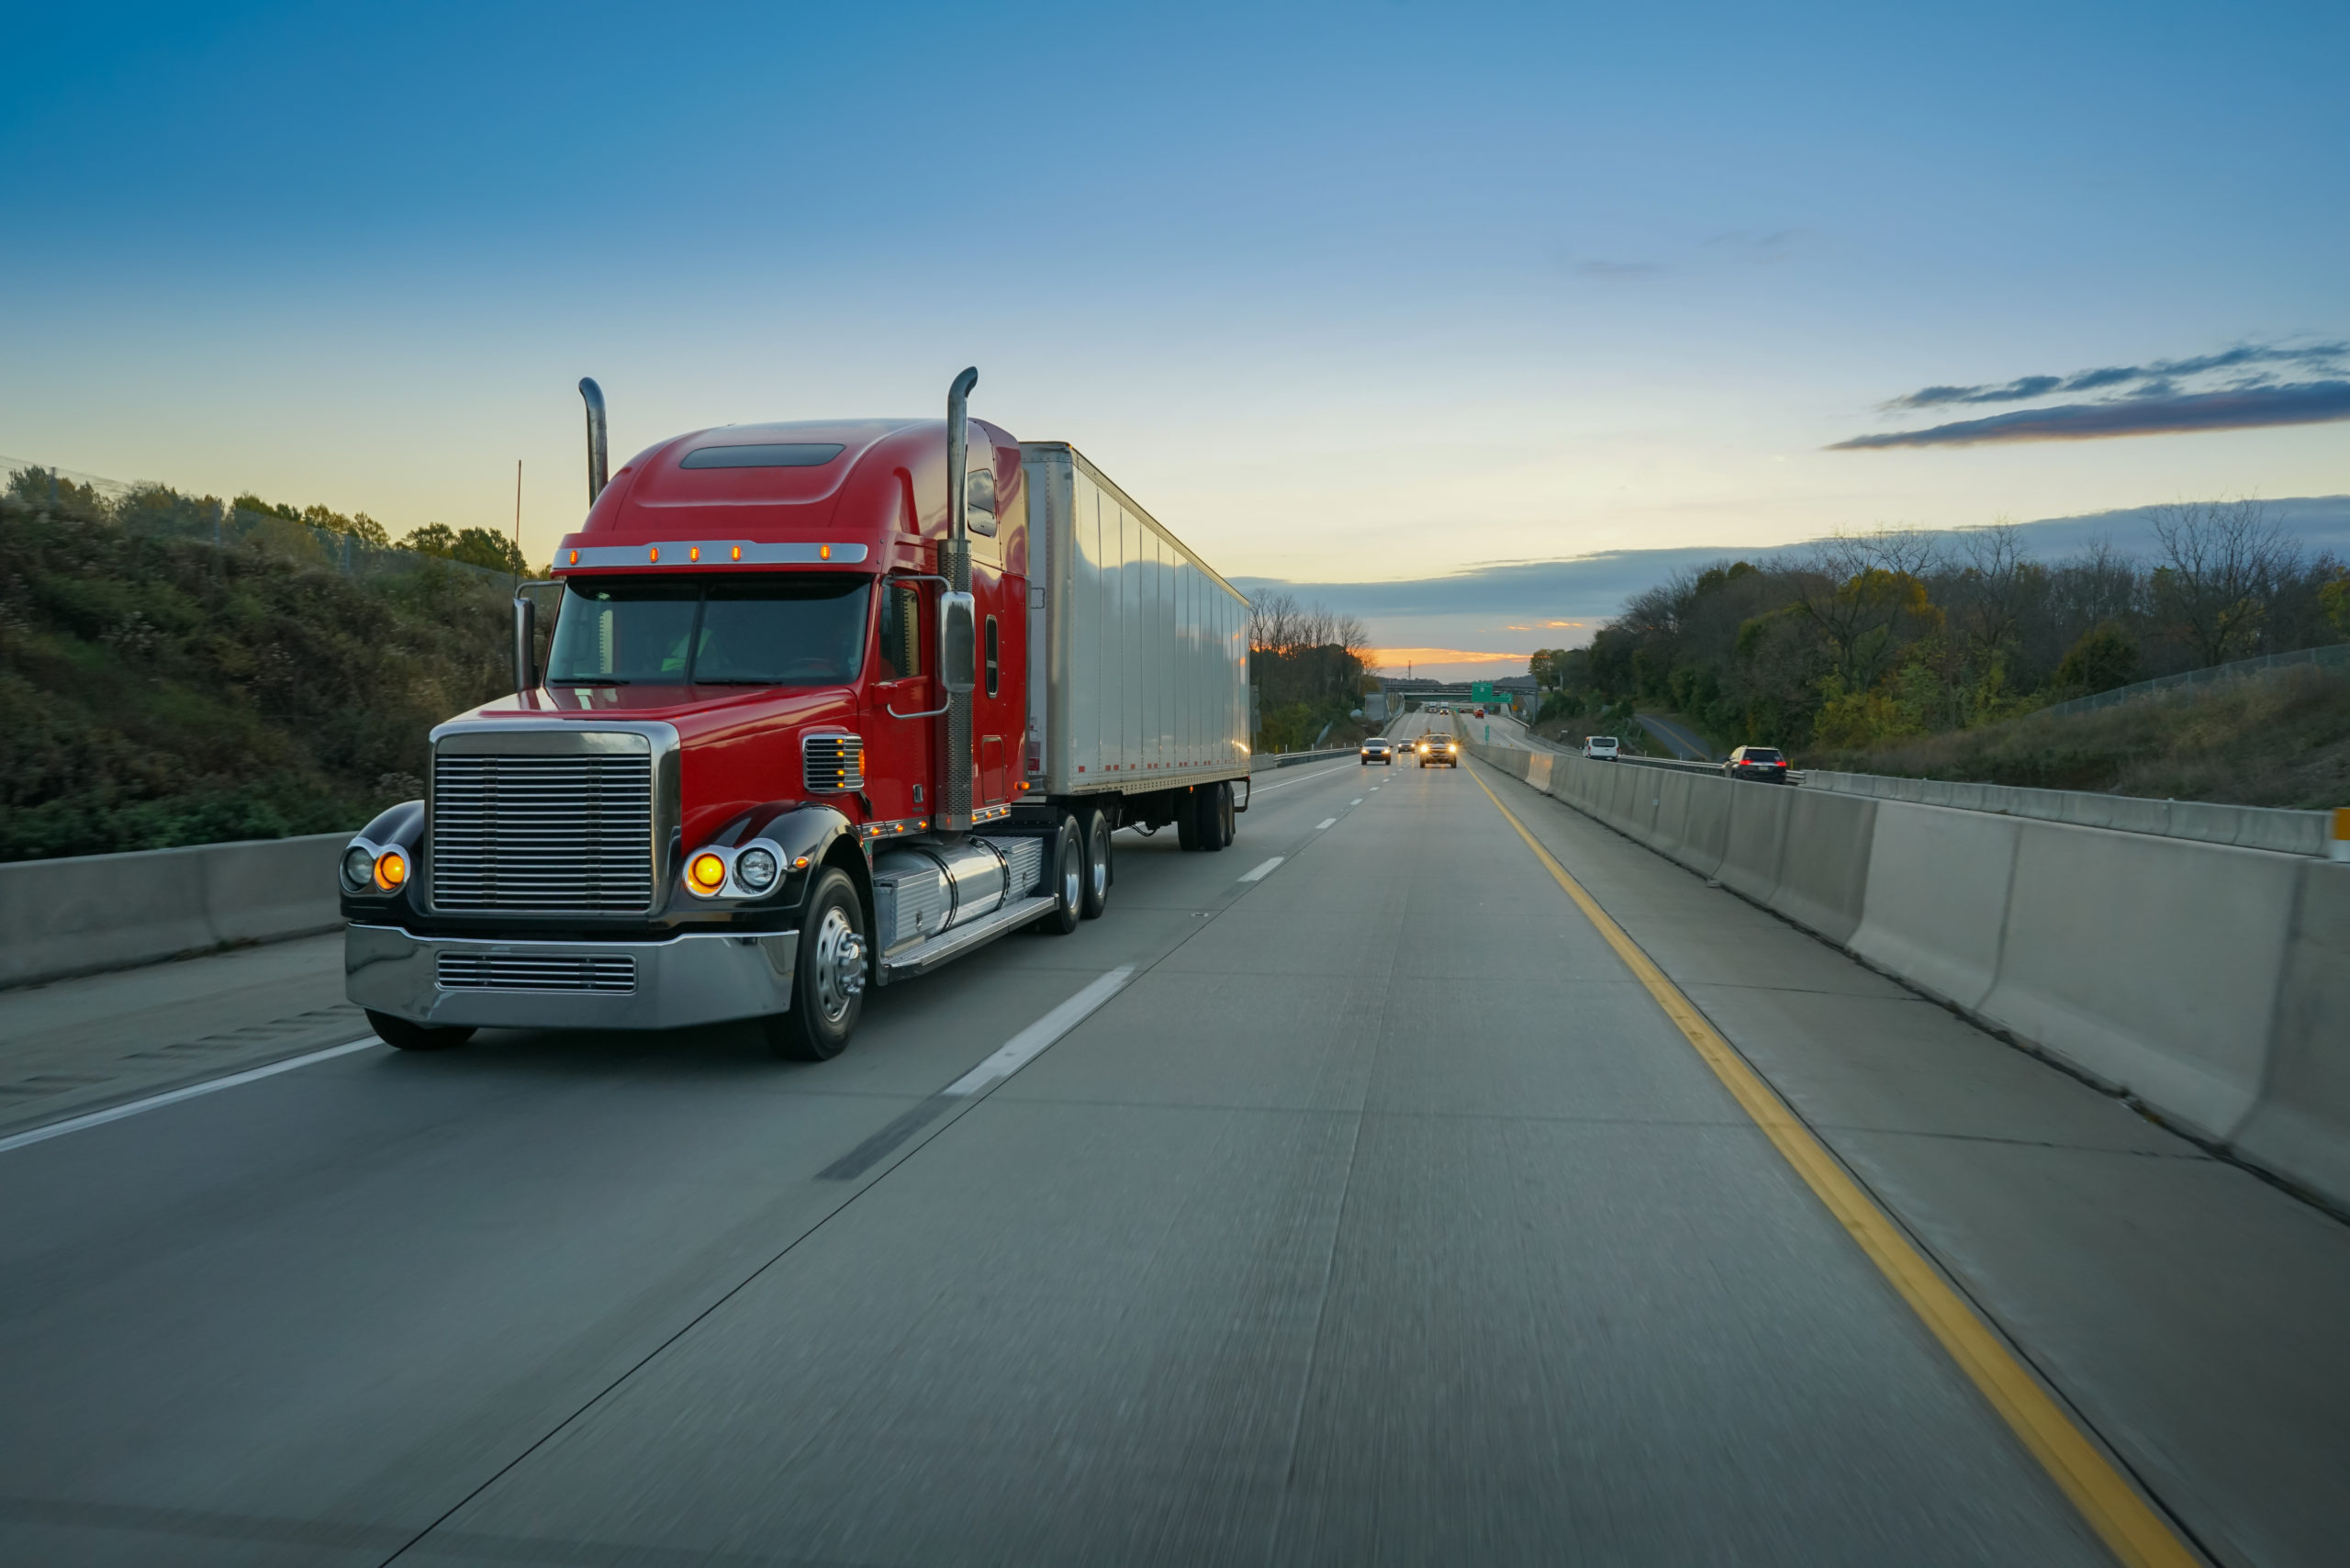 Rate-Oriented Trucking Company Owner Picks Forward